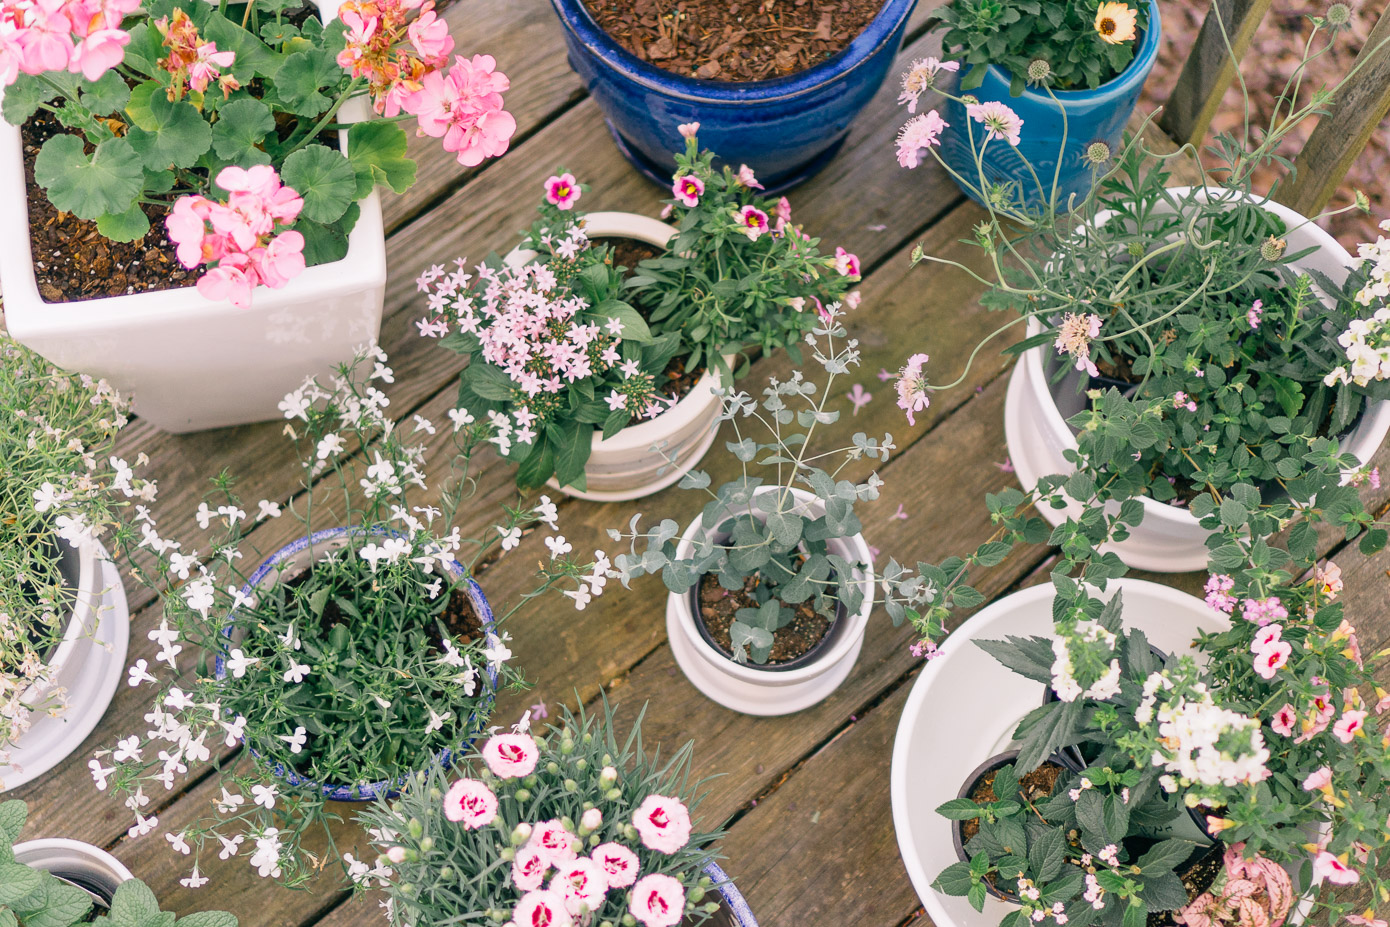 Update Your Outdoor Space with Potted Plants, Harvest Organics Soil | Louella Reese Life & Style Blog